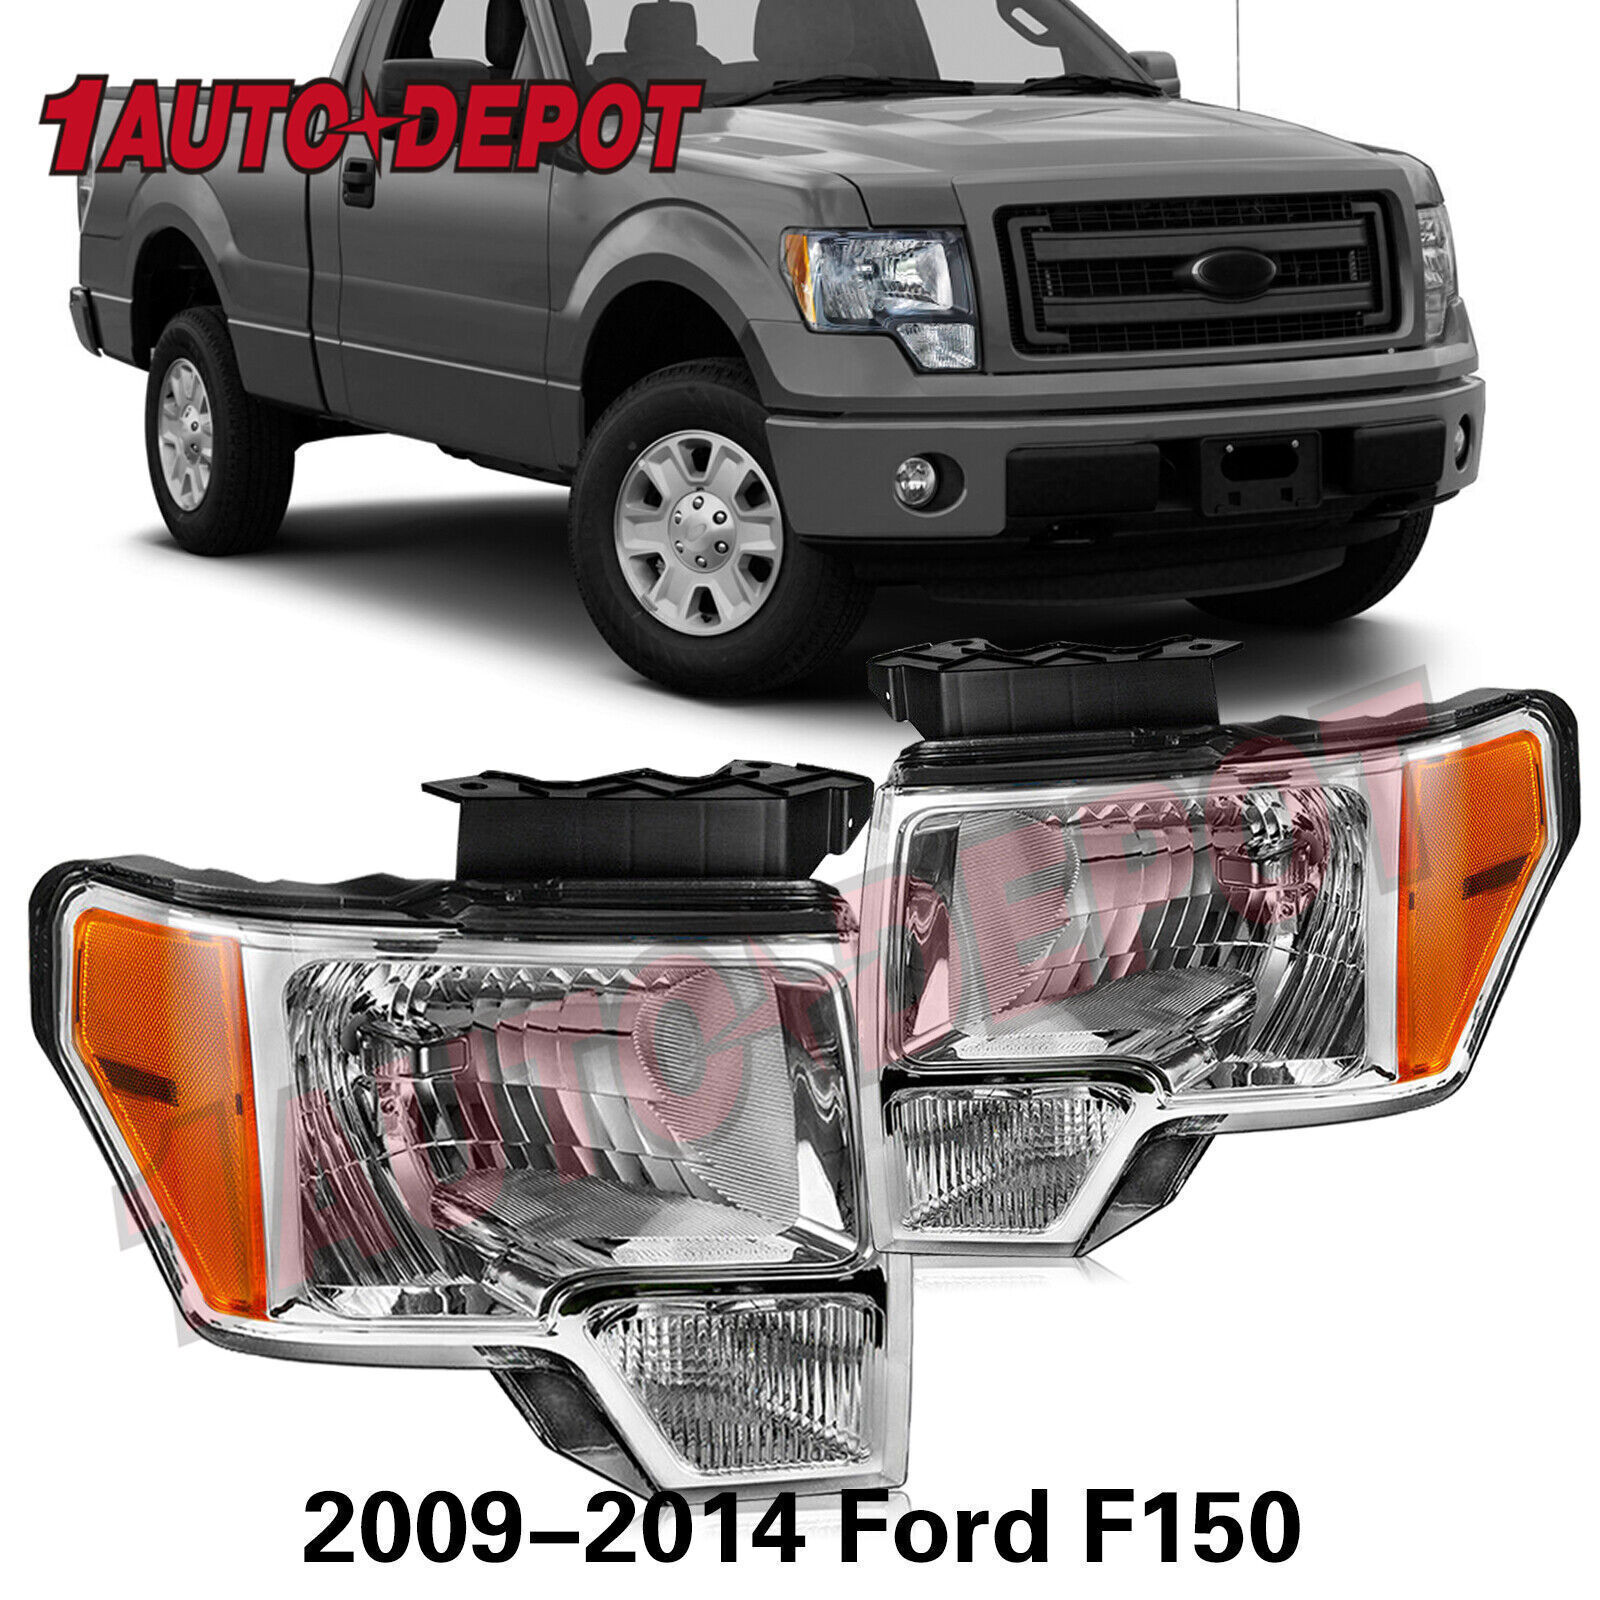 Headlight Replacement Lamps For 2009-2014 Ford F-150 Chrome Housing Amber Corner